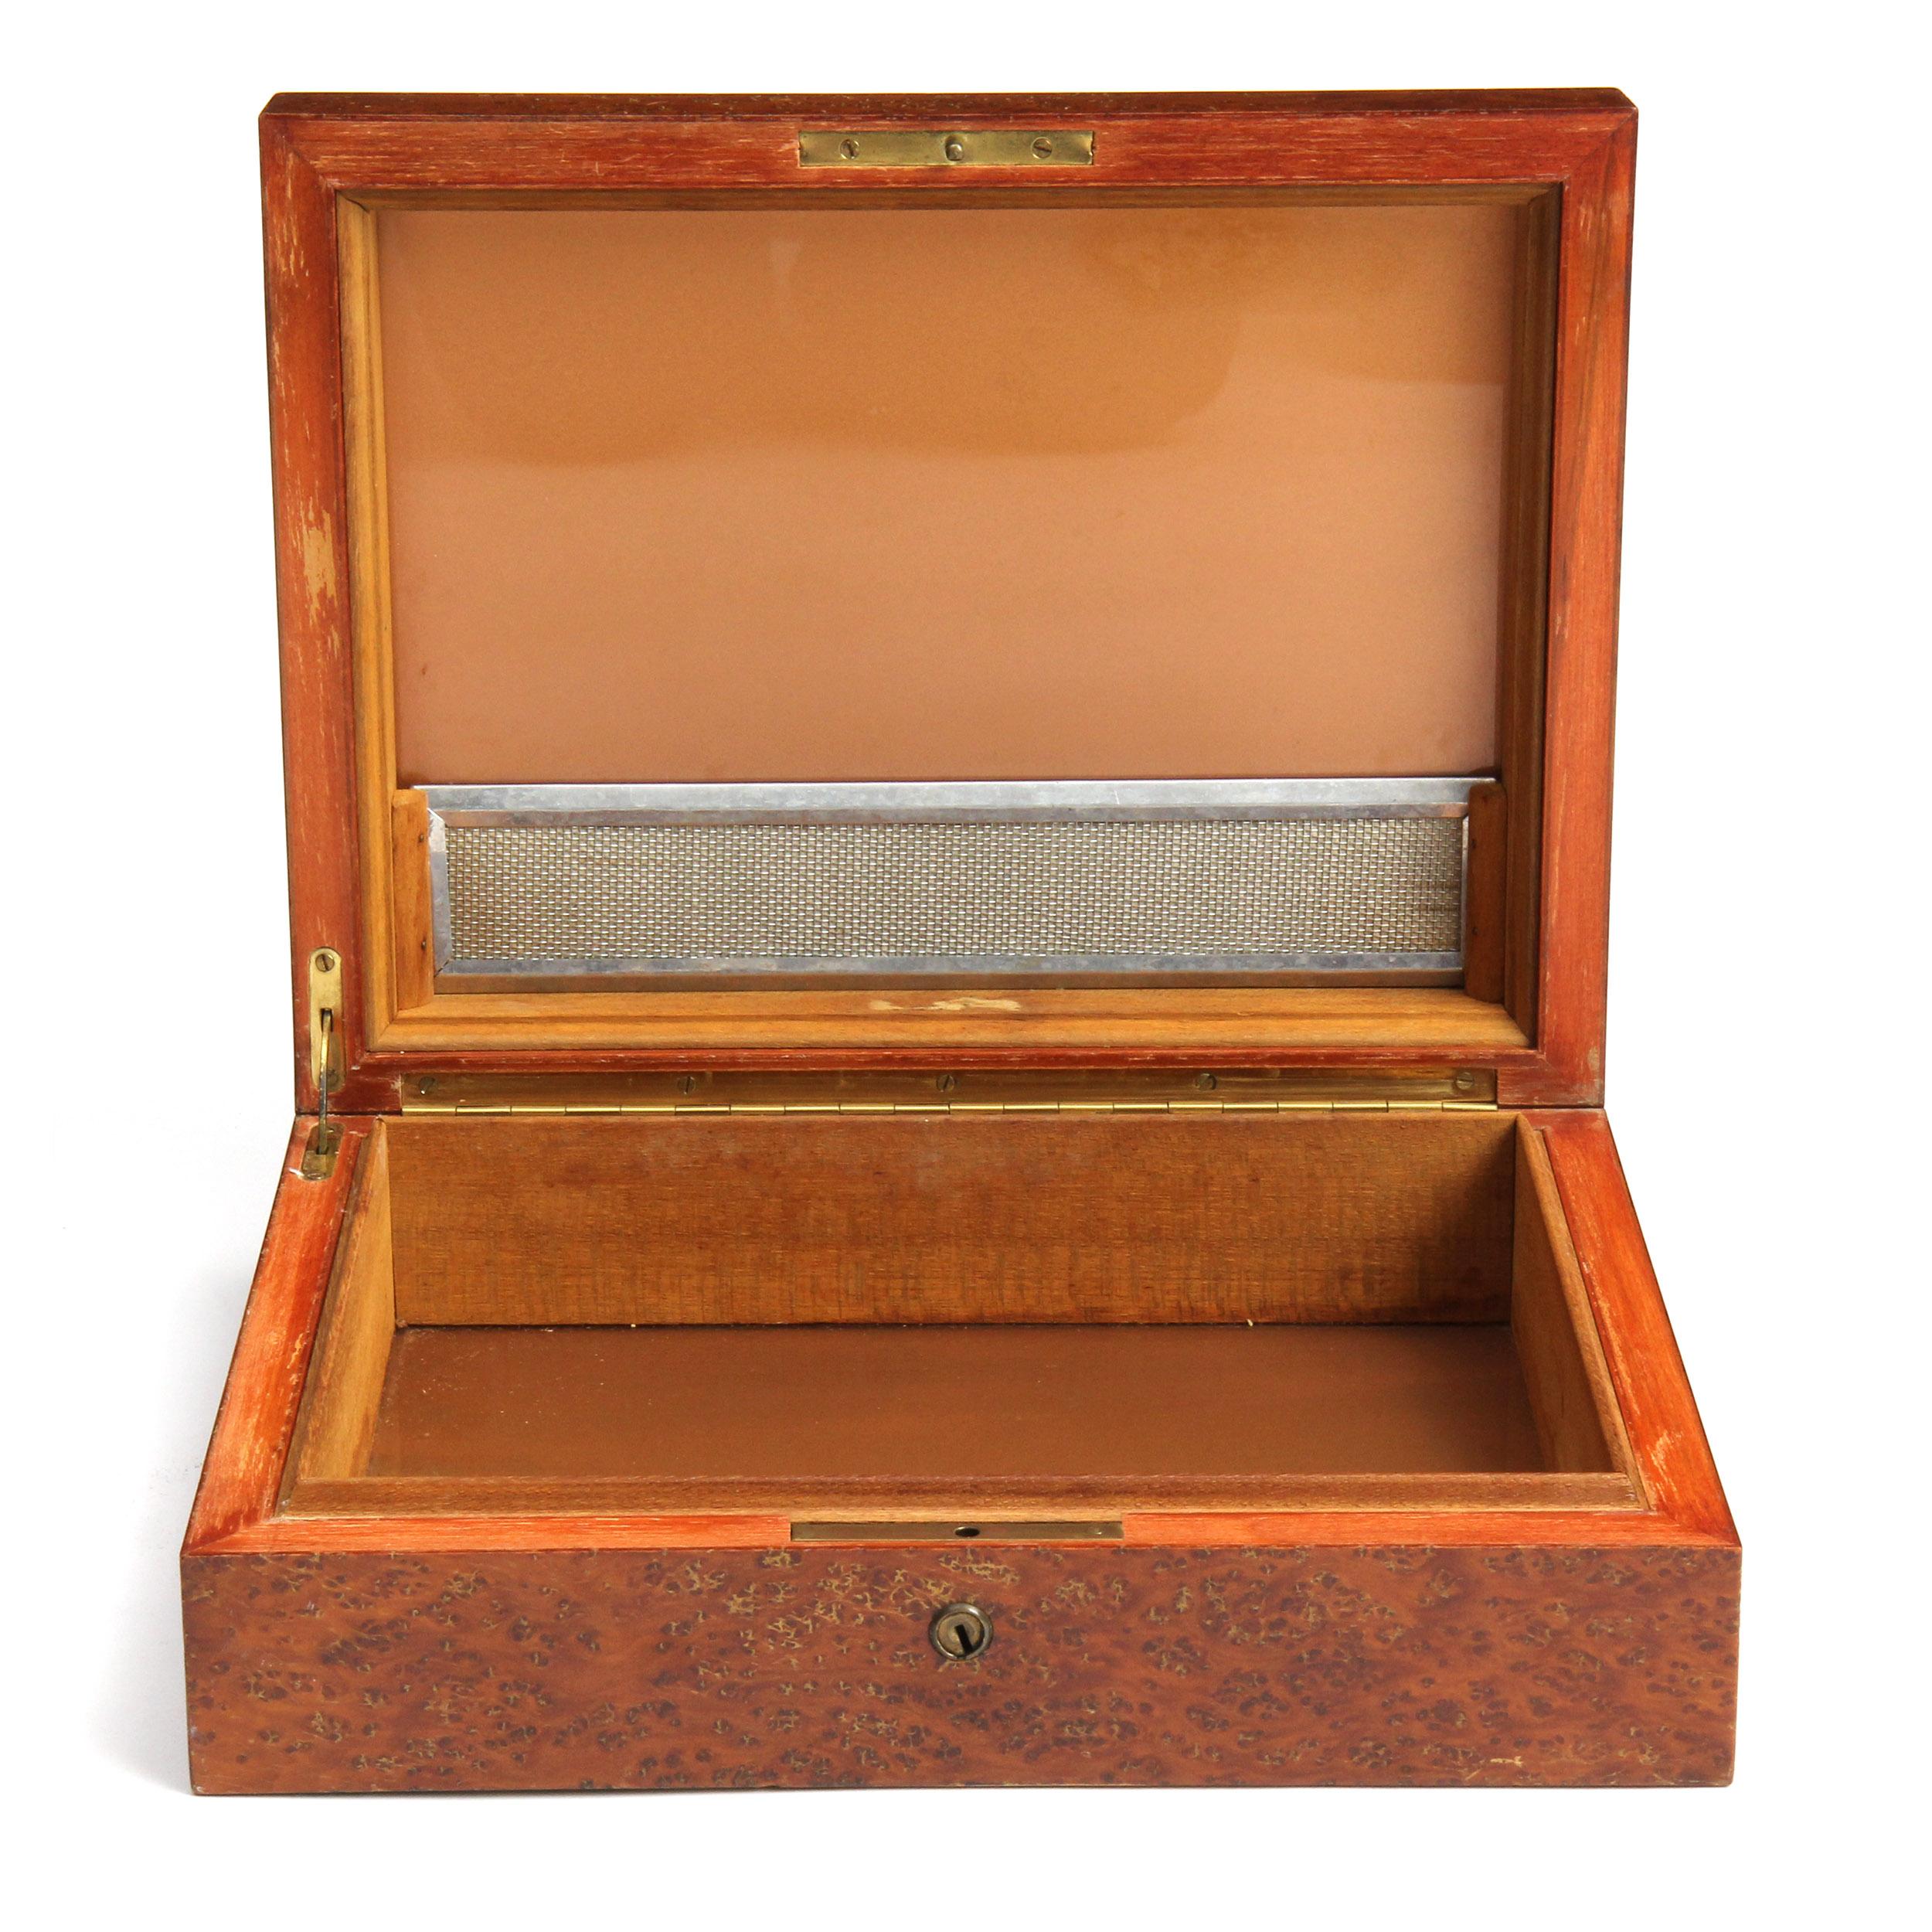 American Craftsman 1950s Burled Maple Humidor For Sale